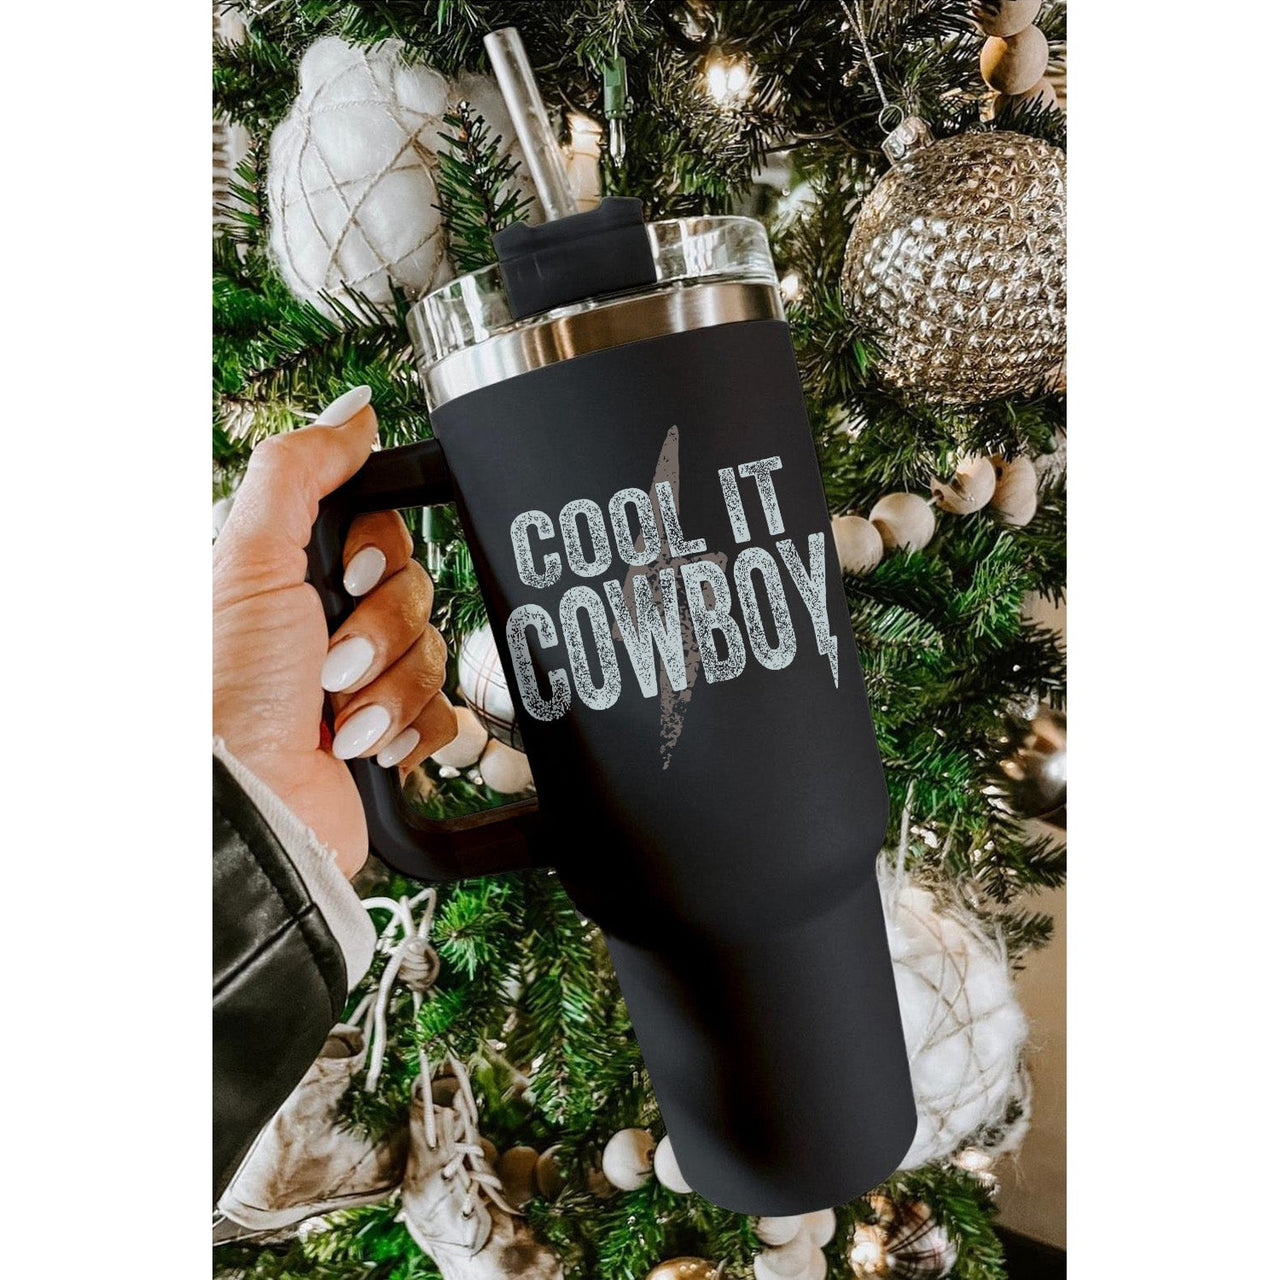 Dear Lover 40oz Cool It Cowboy Lightening Print Stainless Steel Insulated Cup - Black